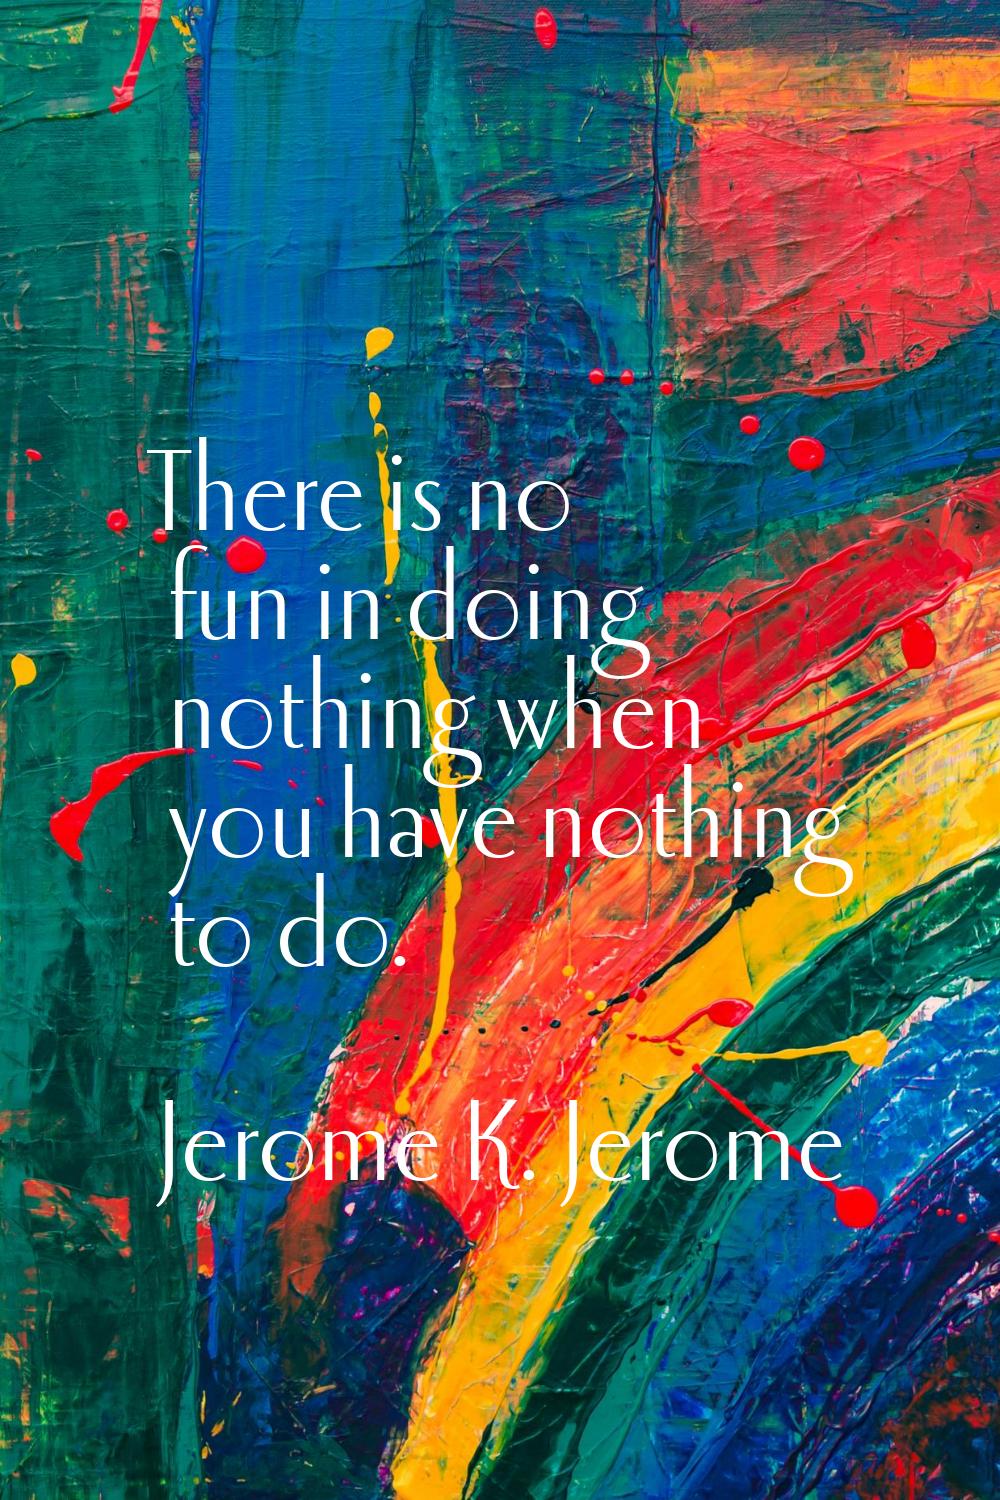 There is no fun in doing nothing when you have nothing to do.